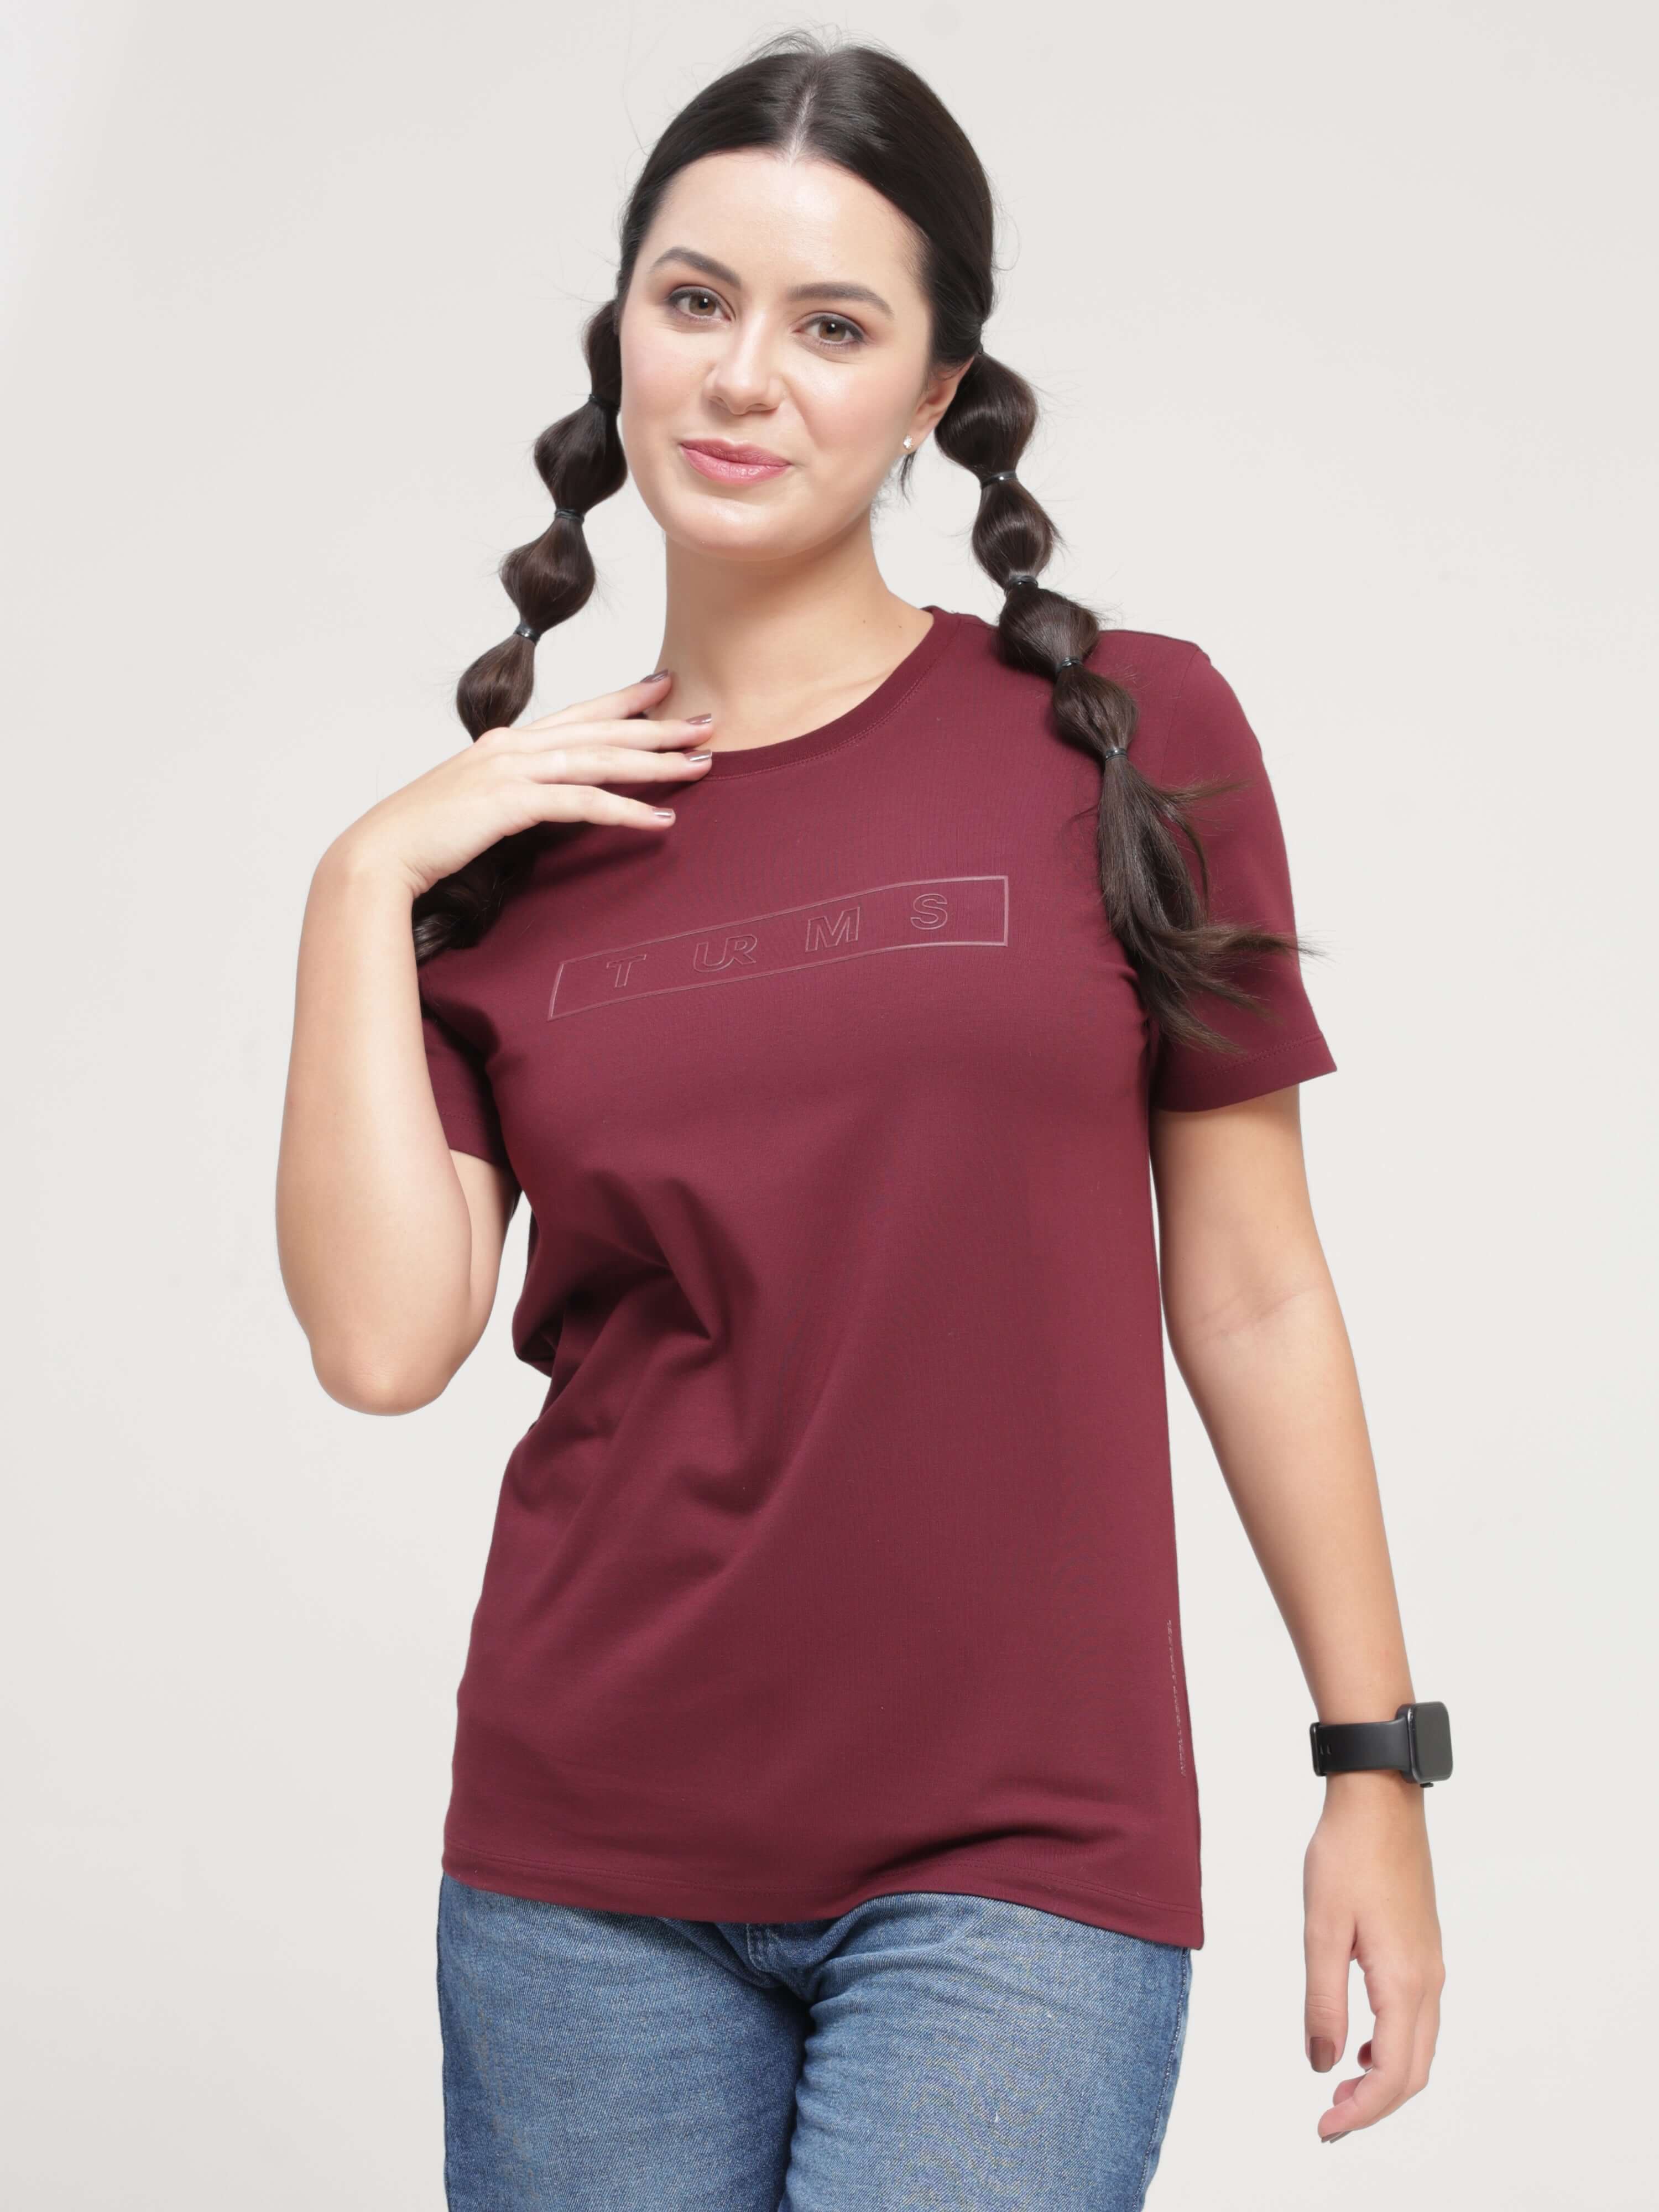 Woman wearing a Burgundy Elite Turms T-shirt, showcasing tailored fit, stretchable fabric, anti-stain and anti-odor intelligent apparel for women.